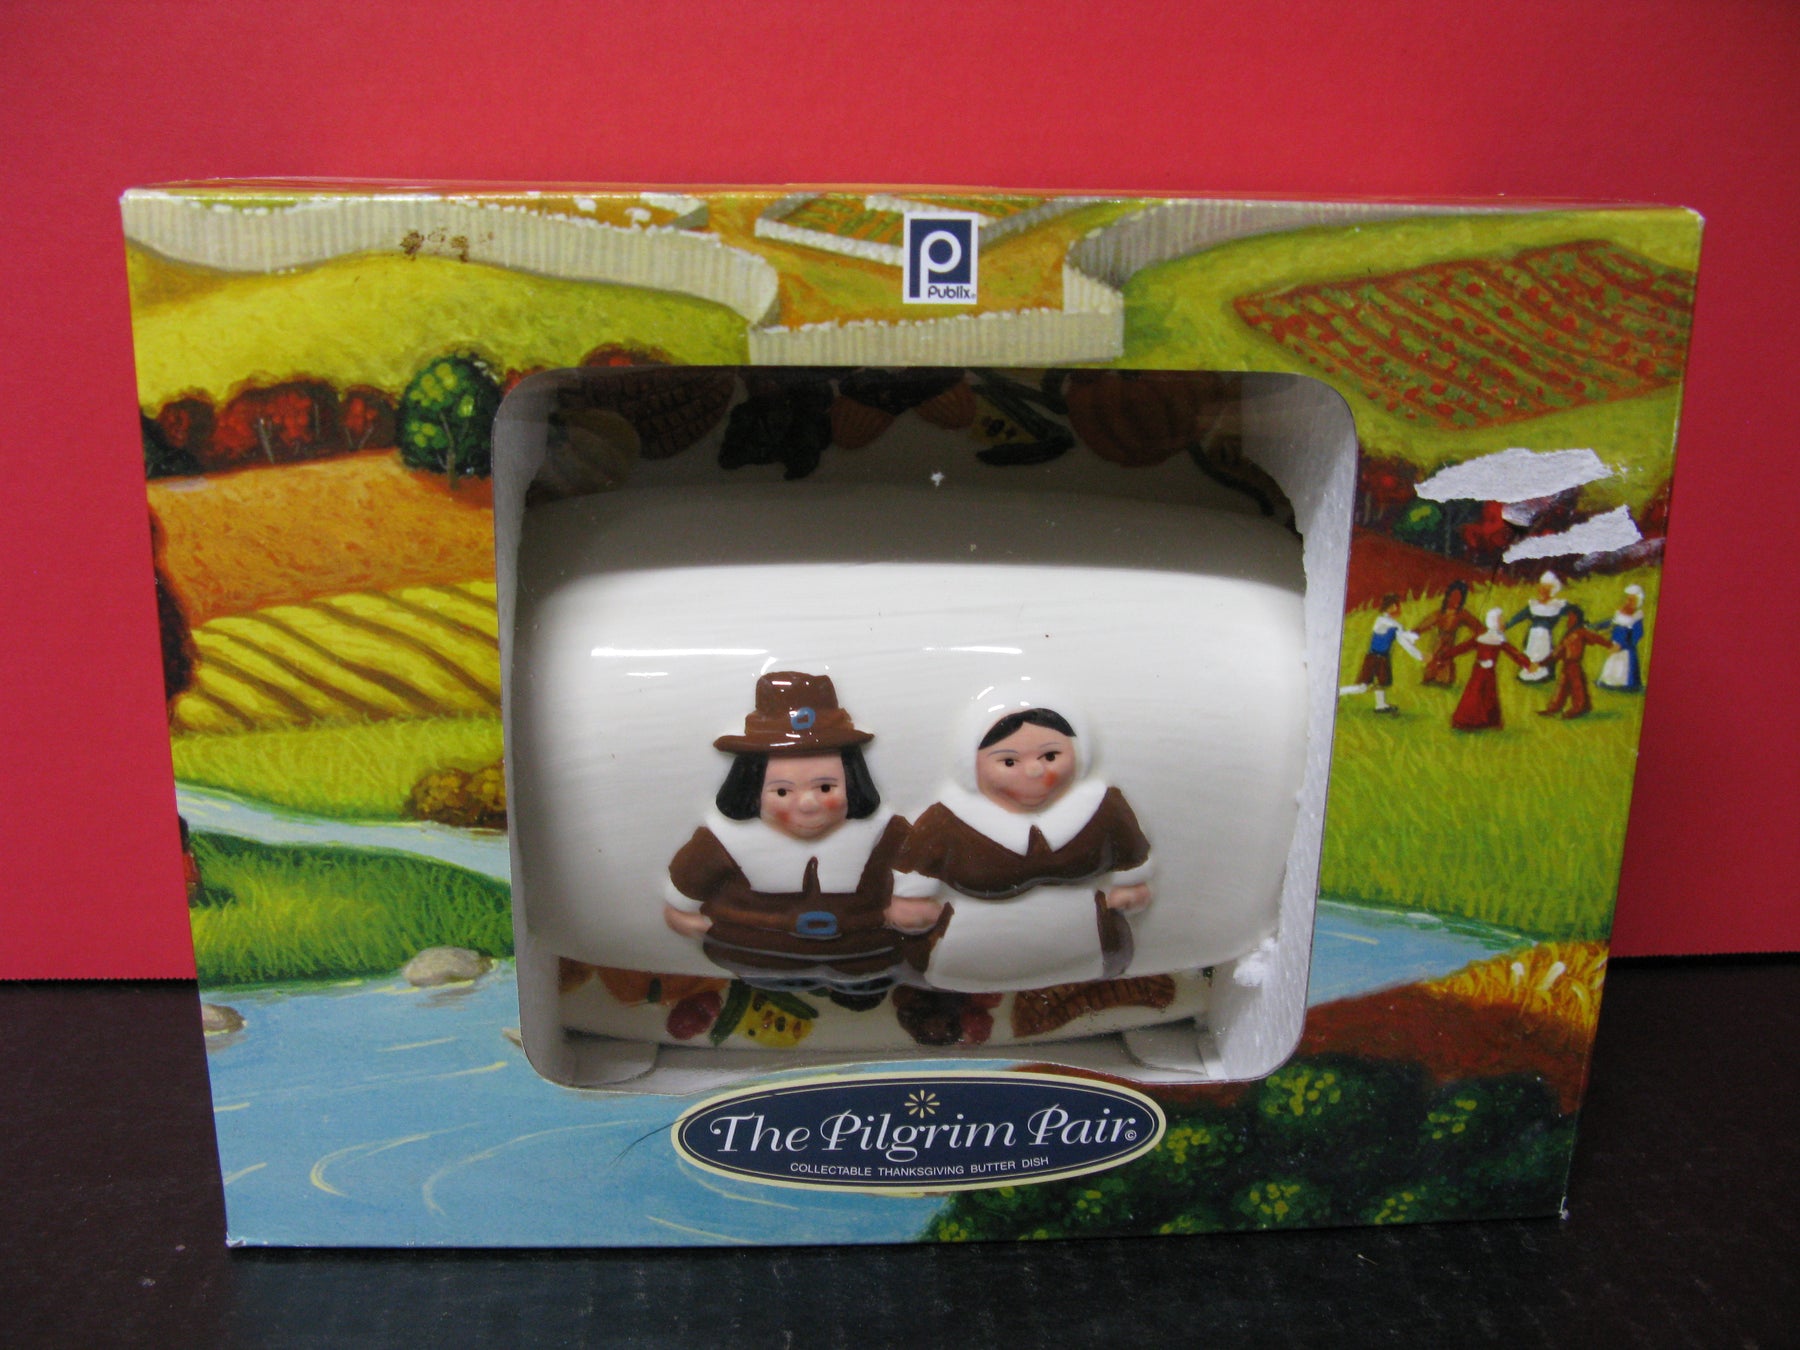 The Pilgrim Pair-Collectible Thanksgiving Butter Dish